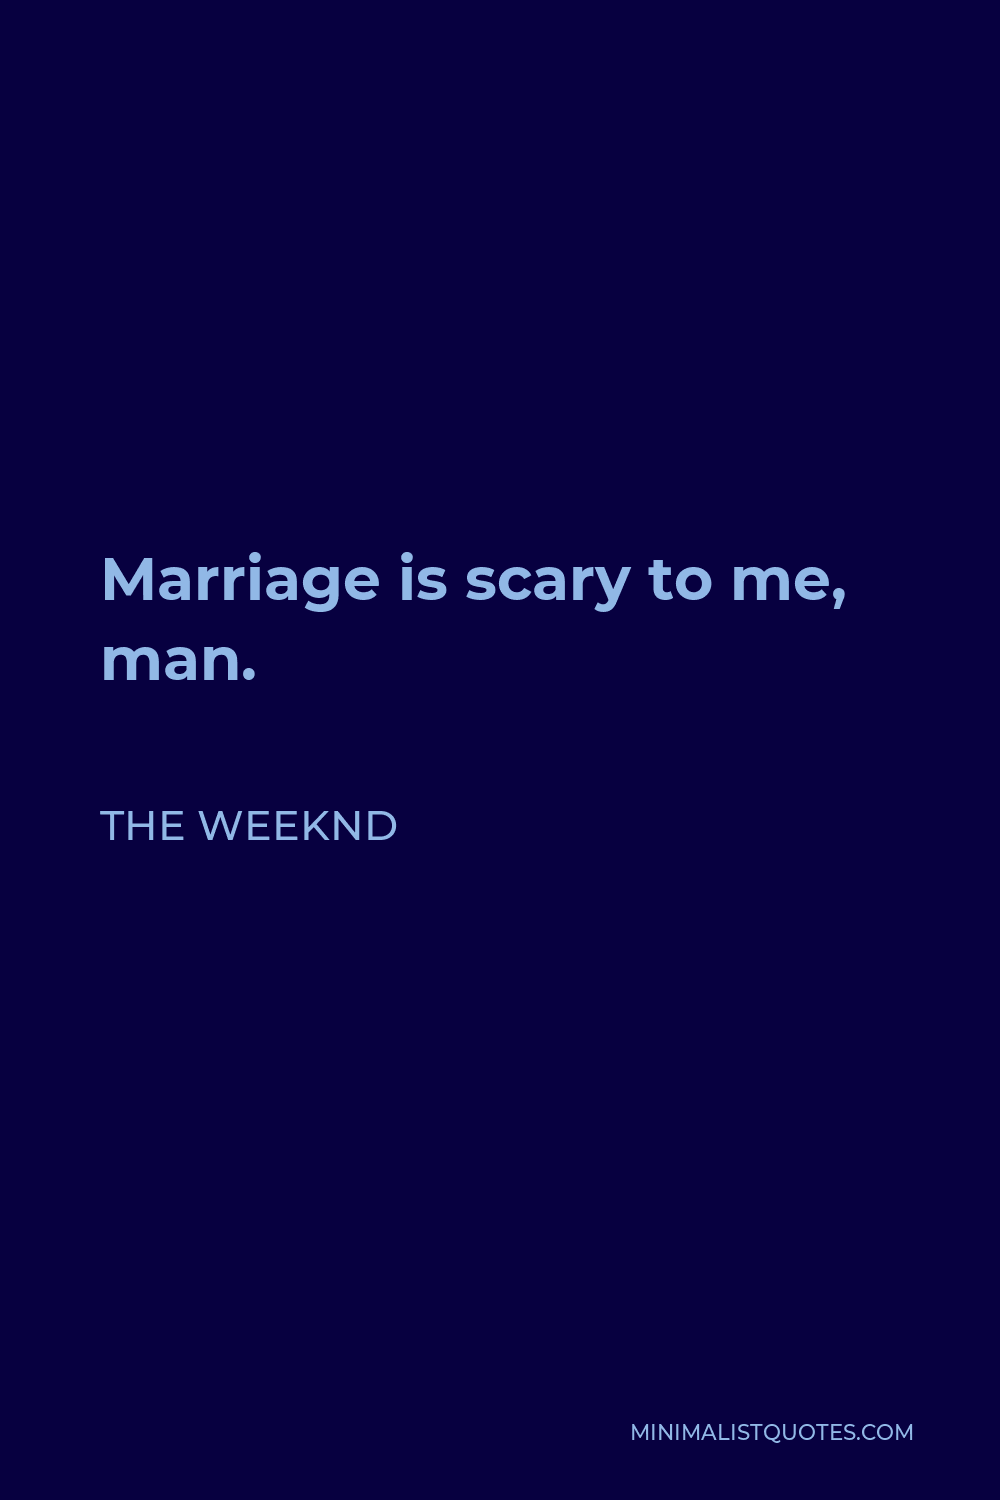 The Weeknd Quote - Marriage is scary to me, man.